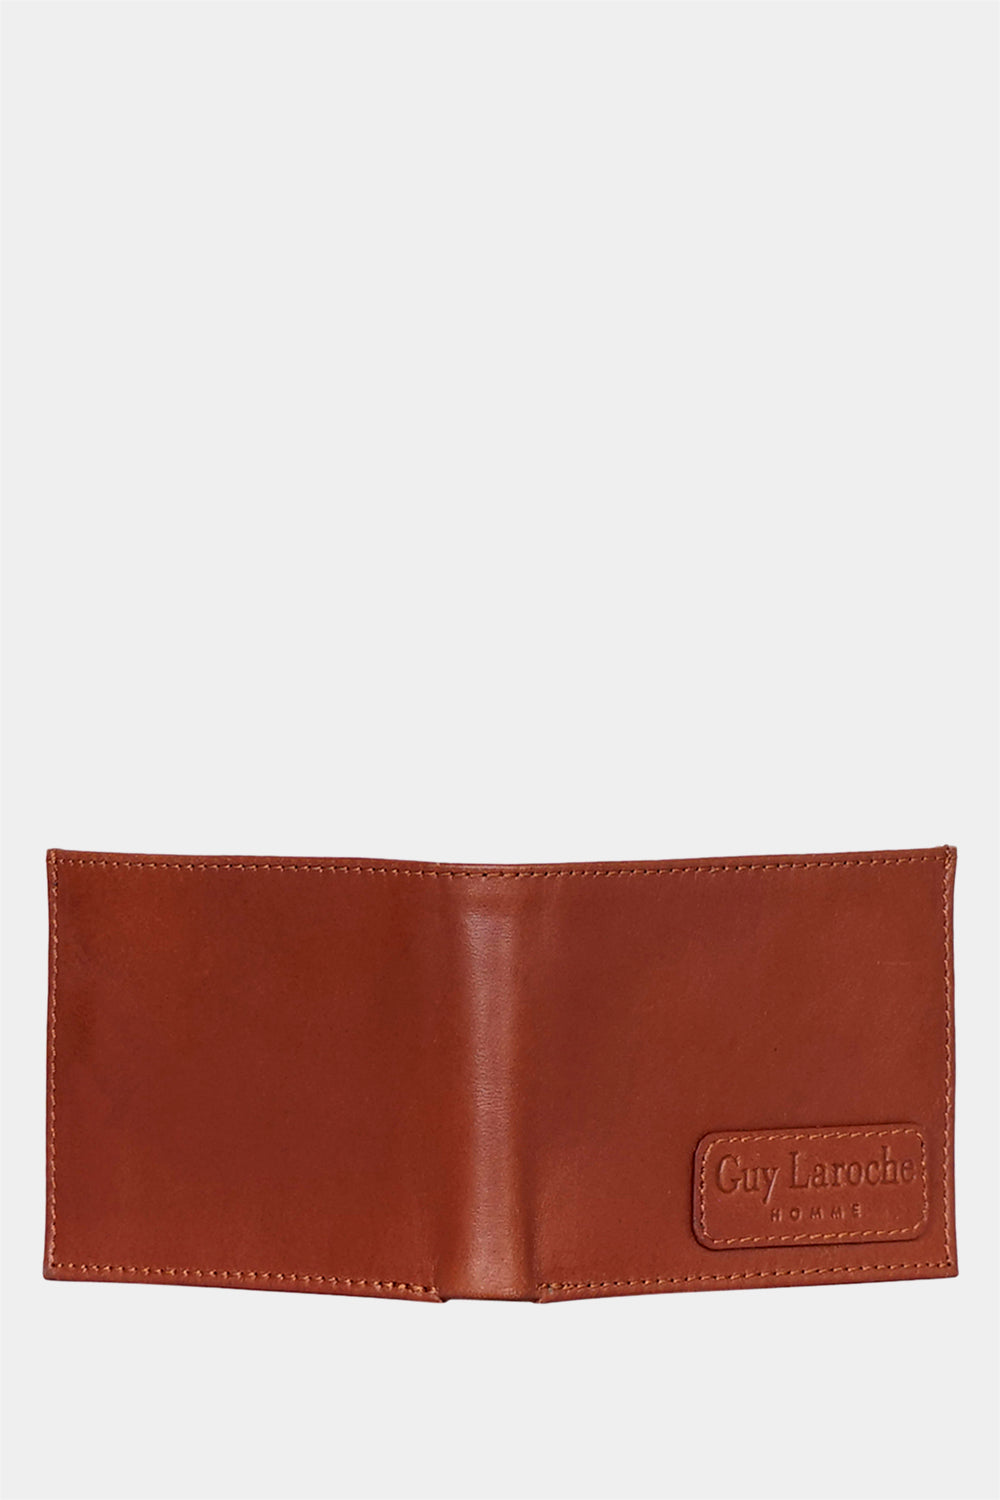 Justanned Men Classic Tan Leather Wallet